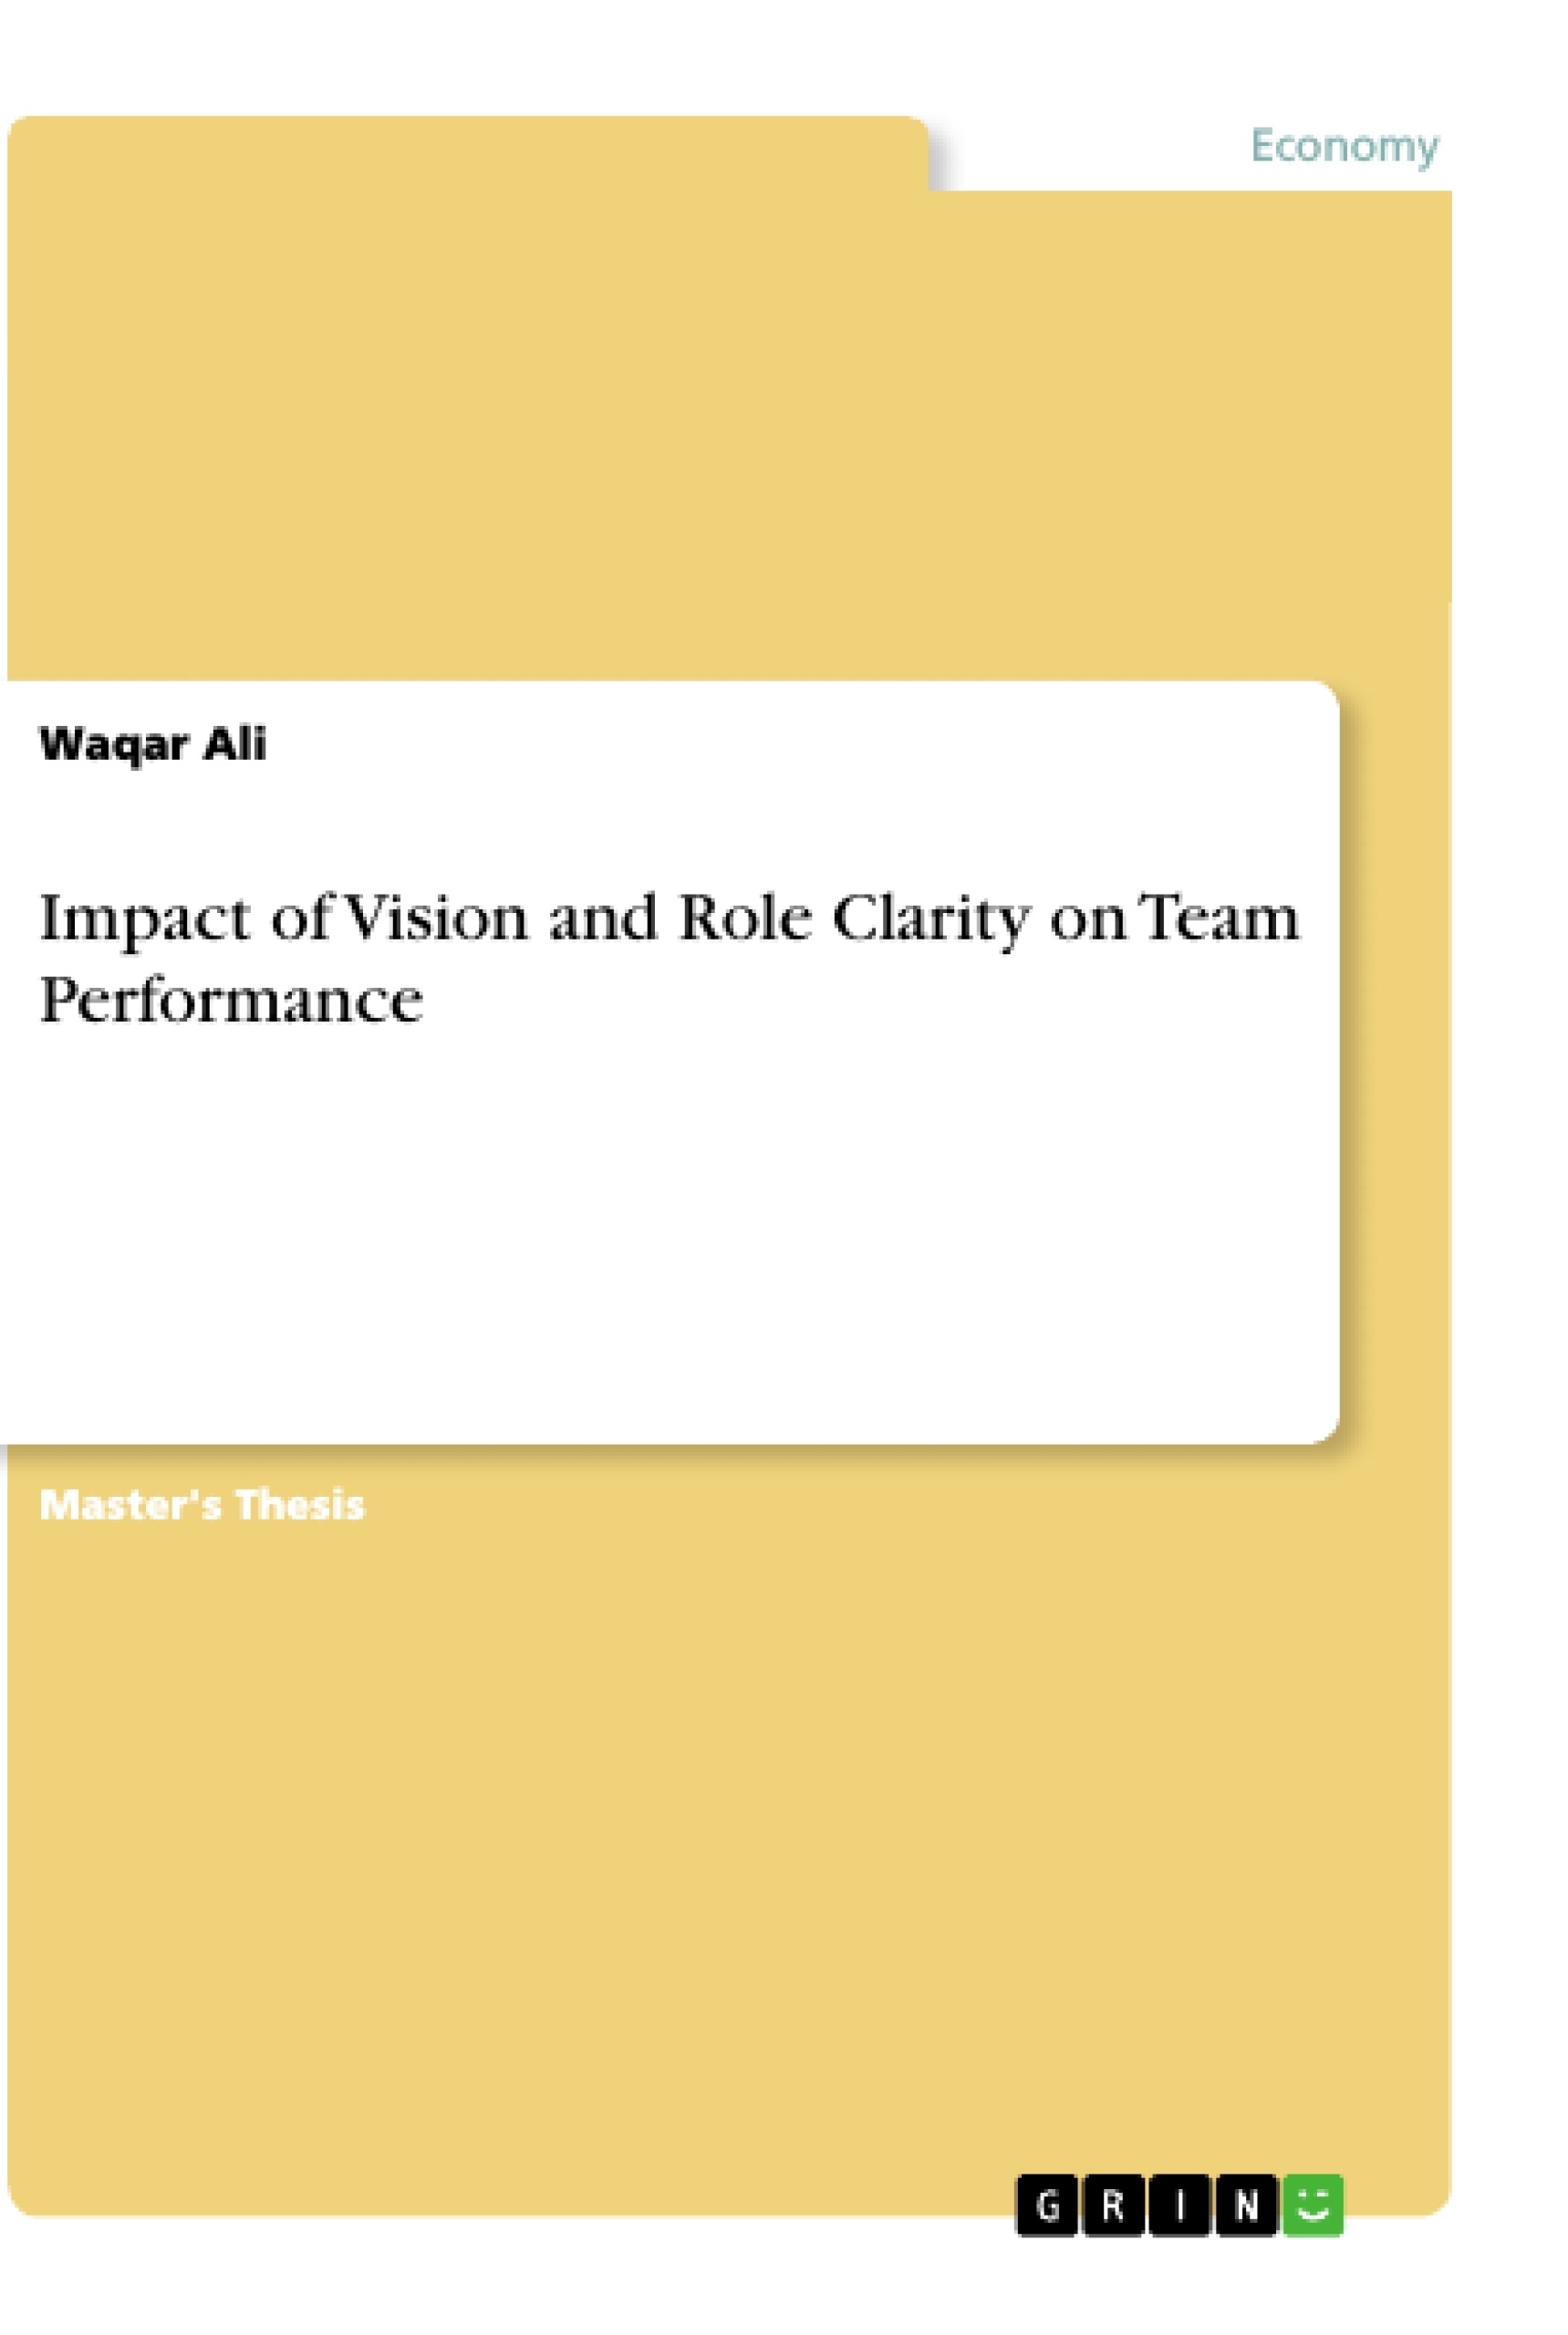 Title: Impact of Vision and Role Clarity on Team Performance